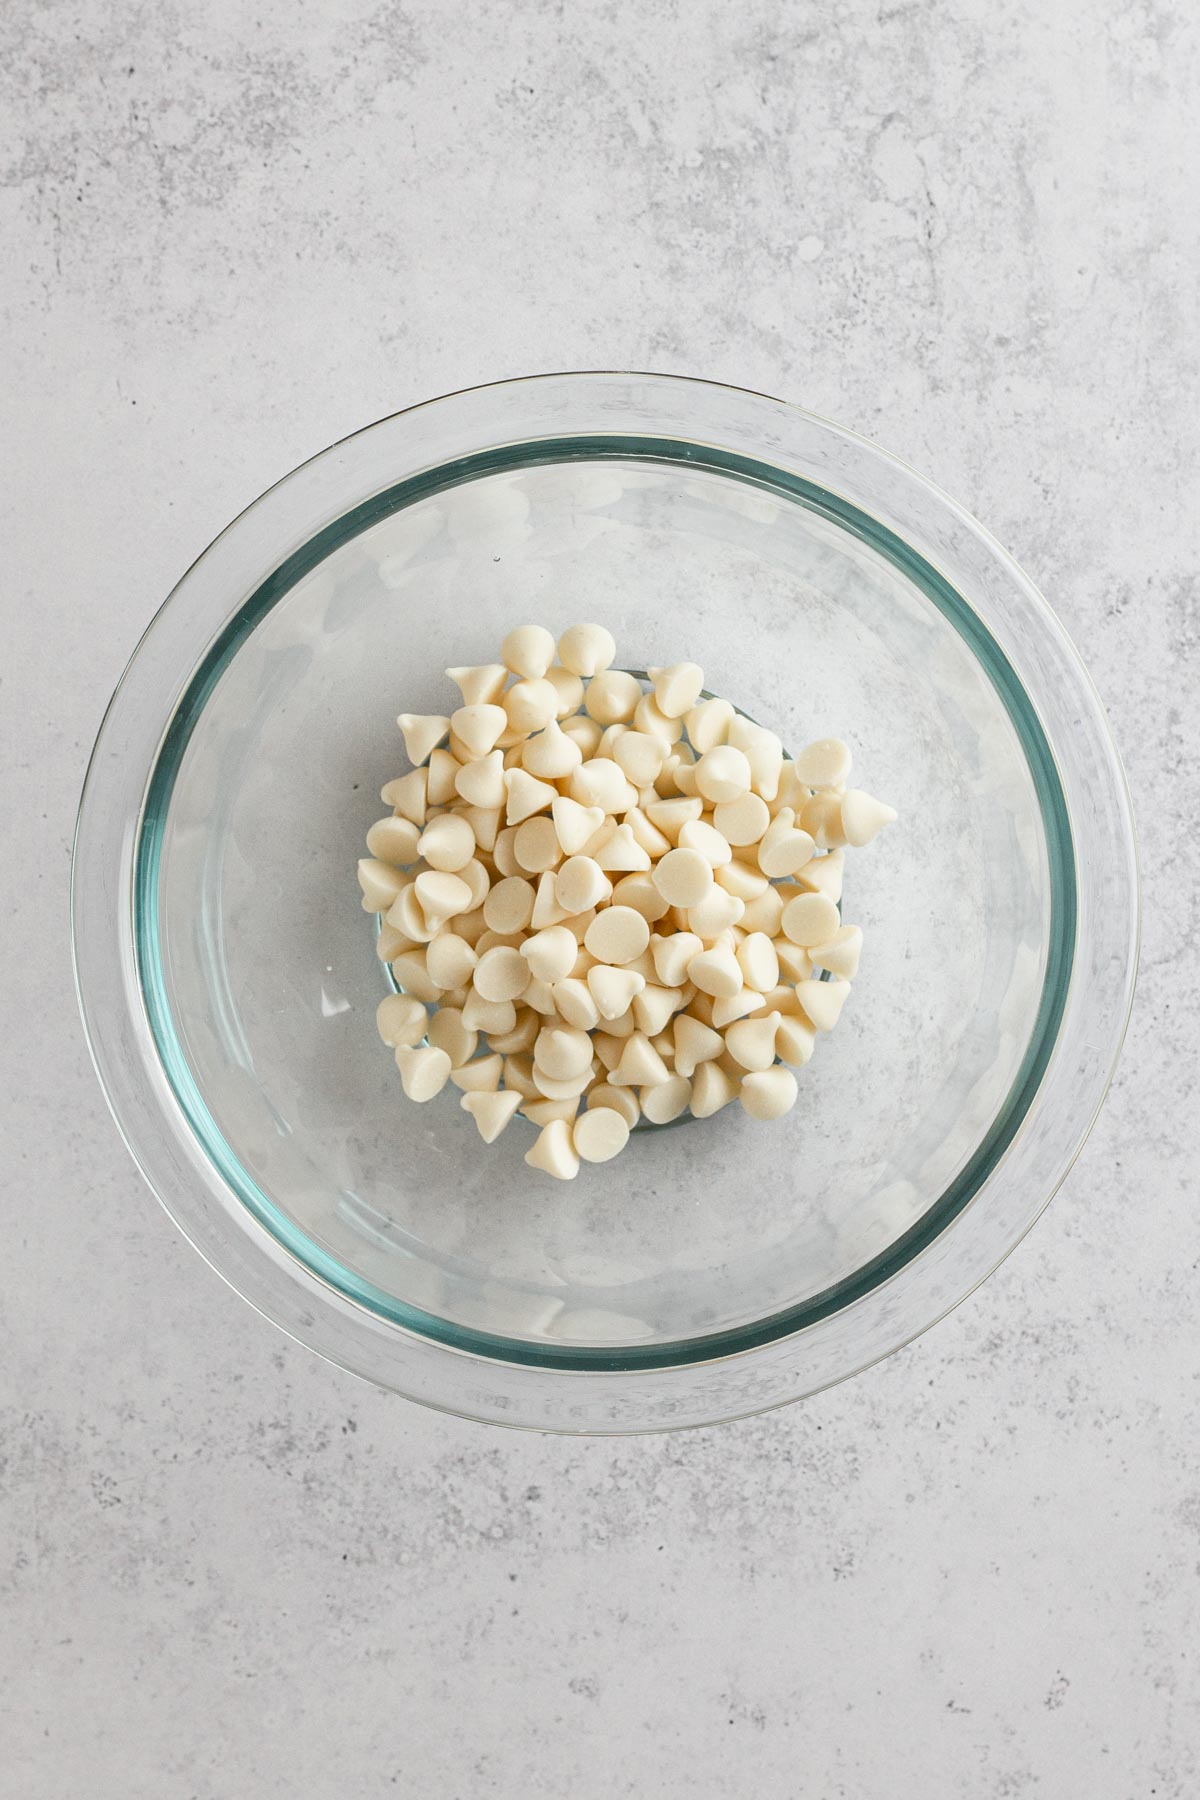 white chocolate chips in a glass bowl